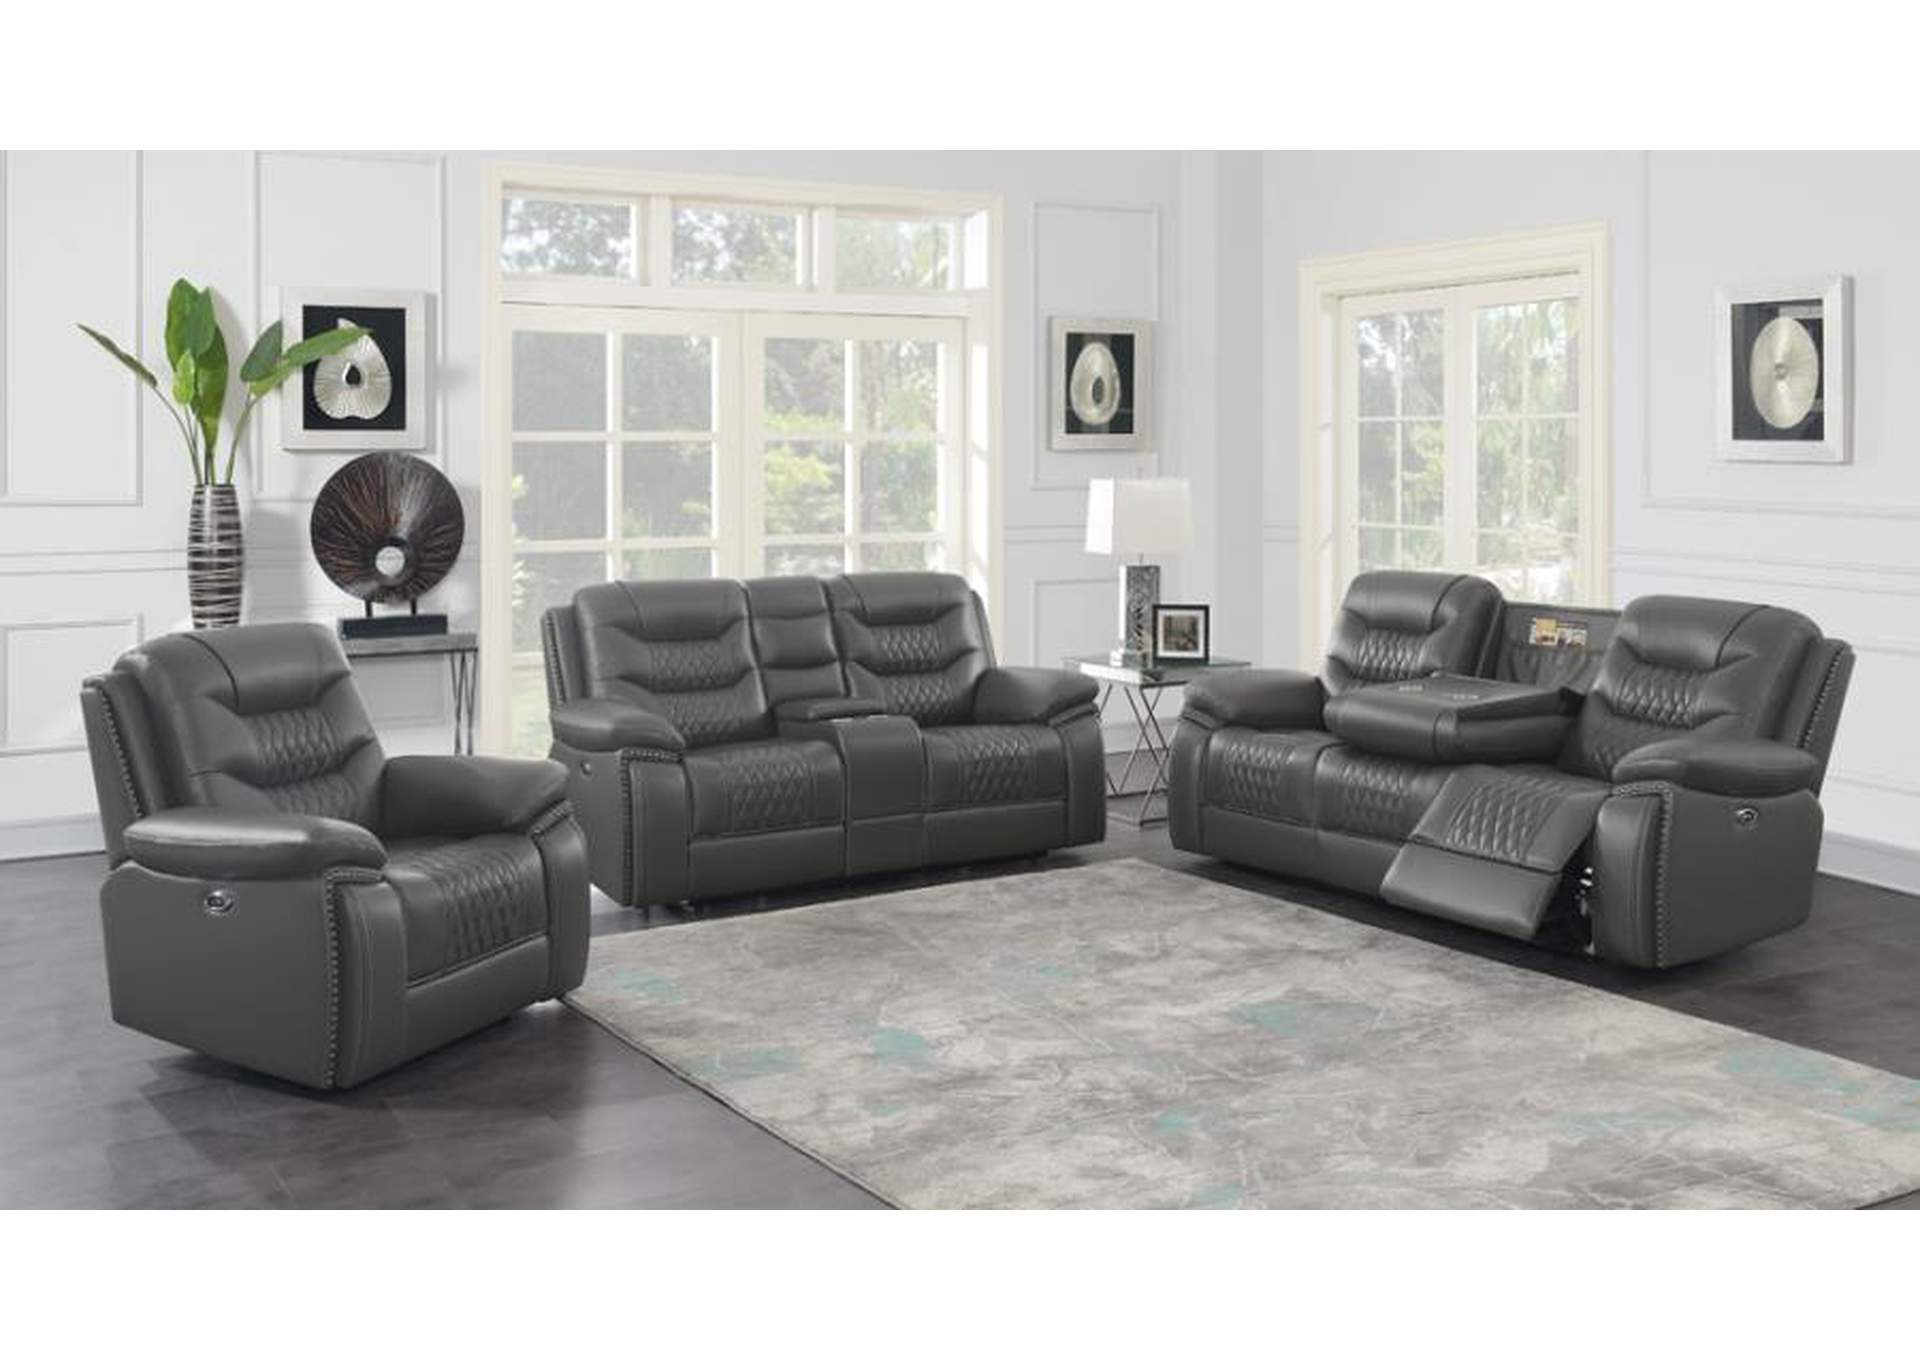 Flamenco 3-piece Tufted Upholstered Power Living Room Set Charcoal,Coaster Furniture